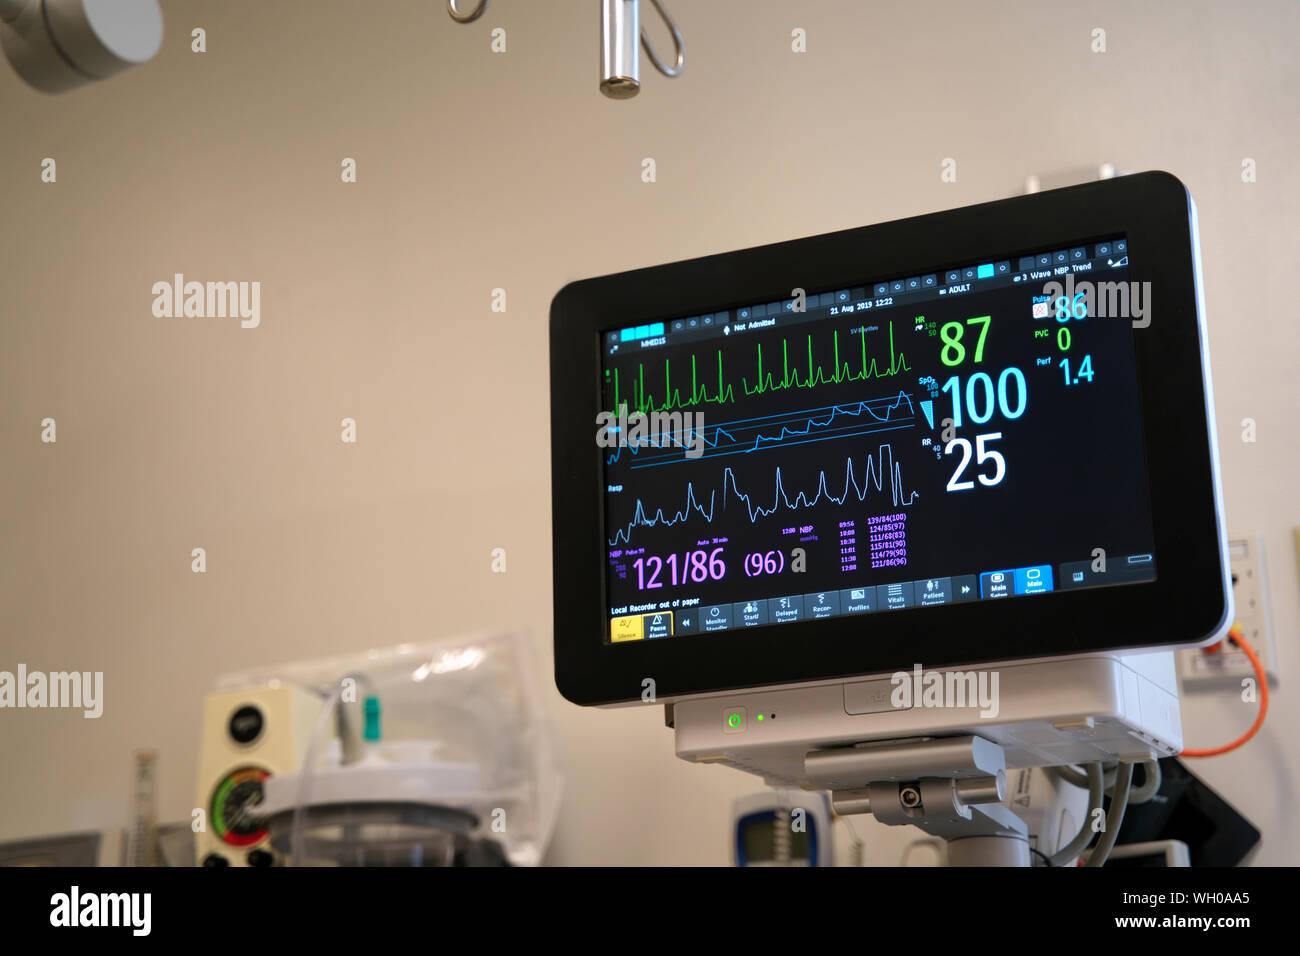 https://c8.alamy.com/comp/WH0AA5/patient-monitoring-systems-relay-blood-pressure-oxygen-levels-heart-rate-and-other-vital-data-in-today%60s-modern-hospital-WH0AA5.jpg